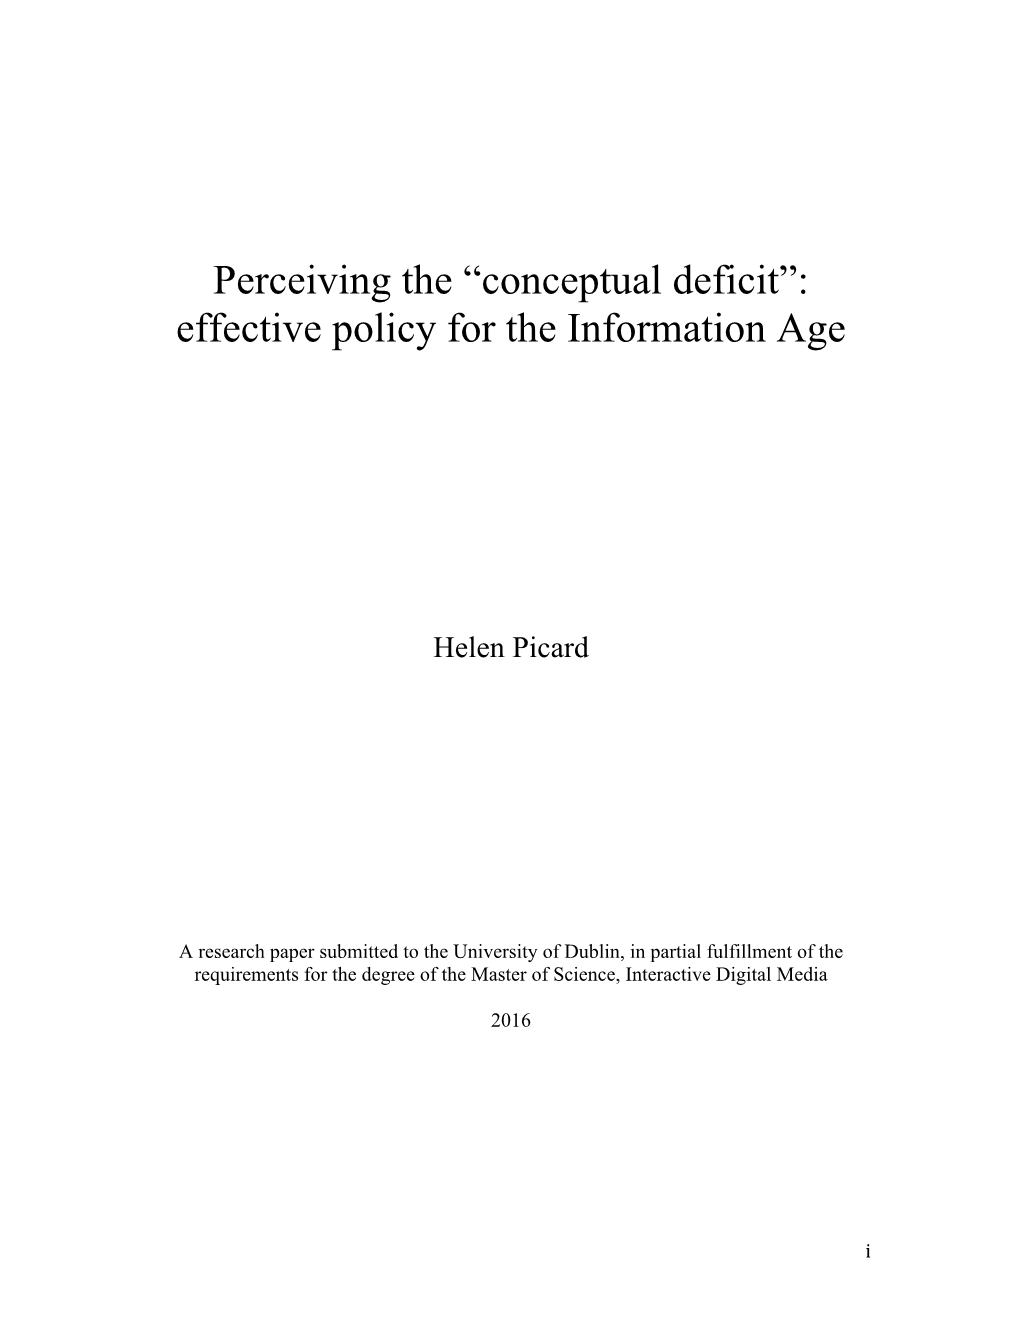 Perceiving the “Conceptual Deficit”: Effective Policy for the Information Age